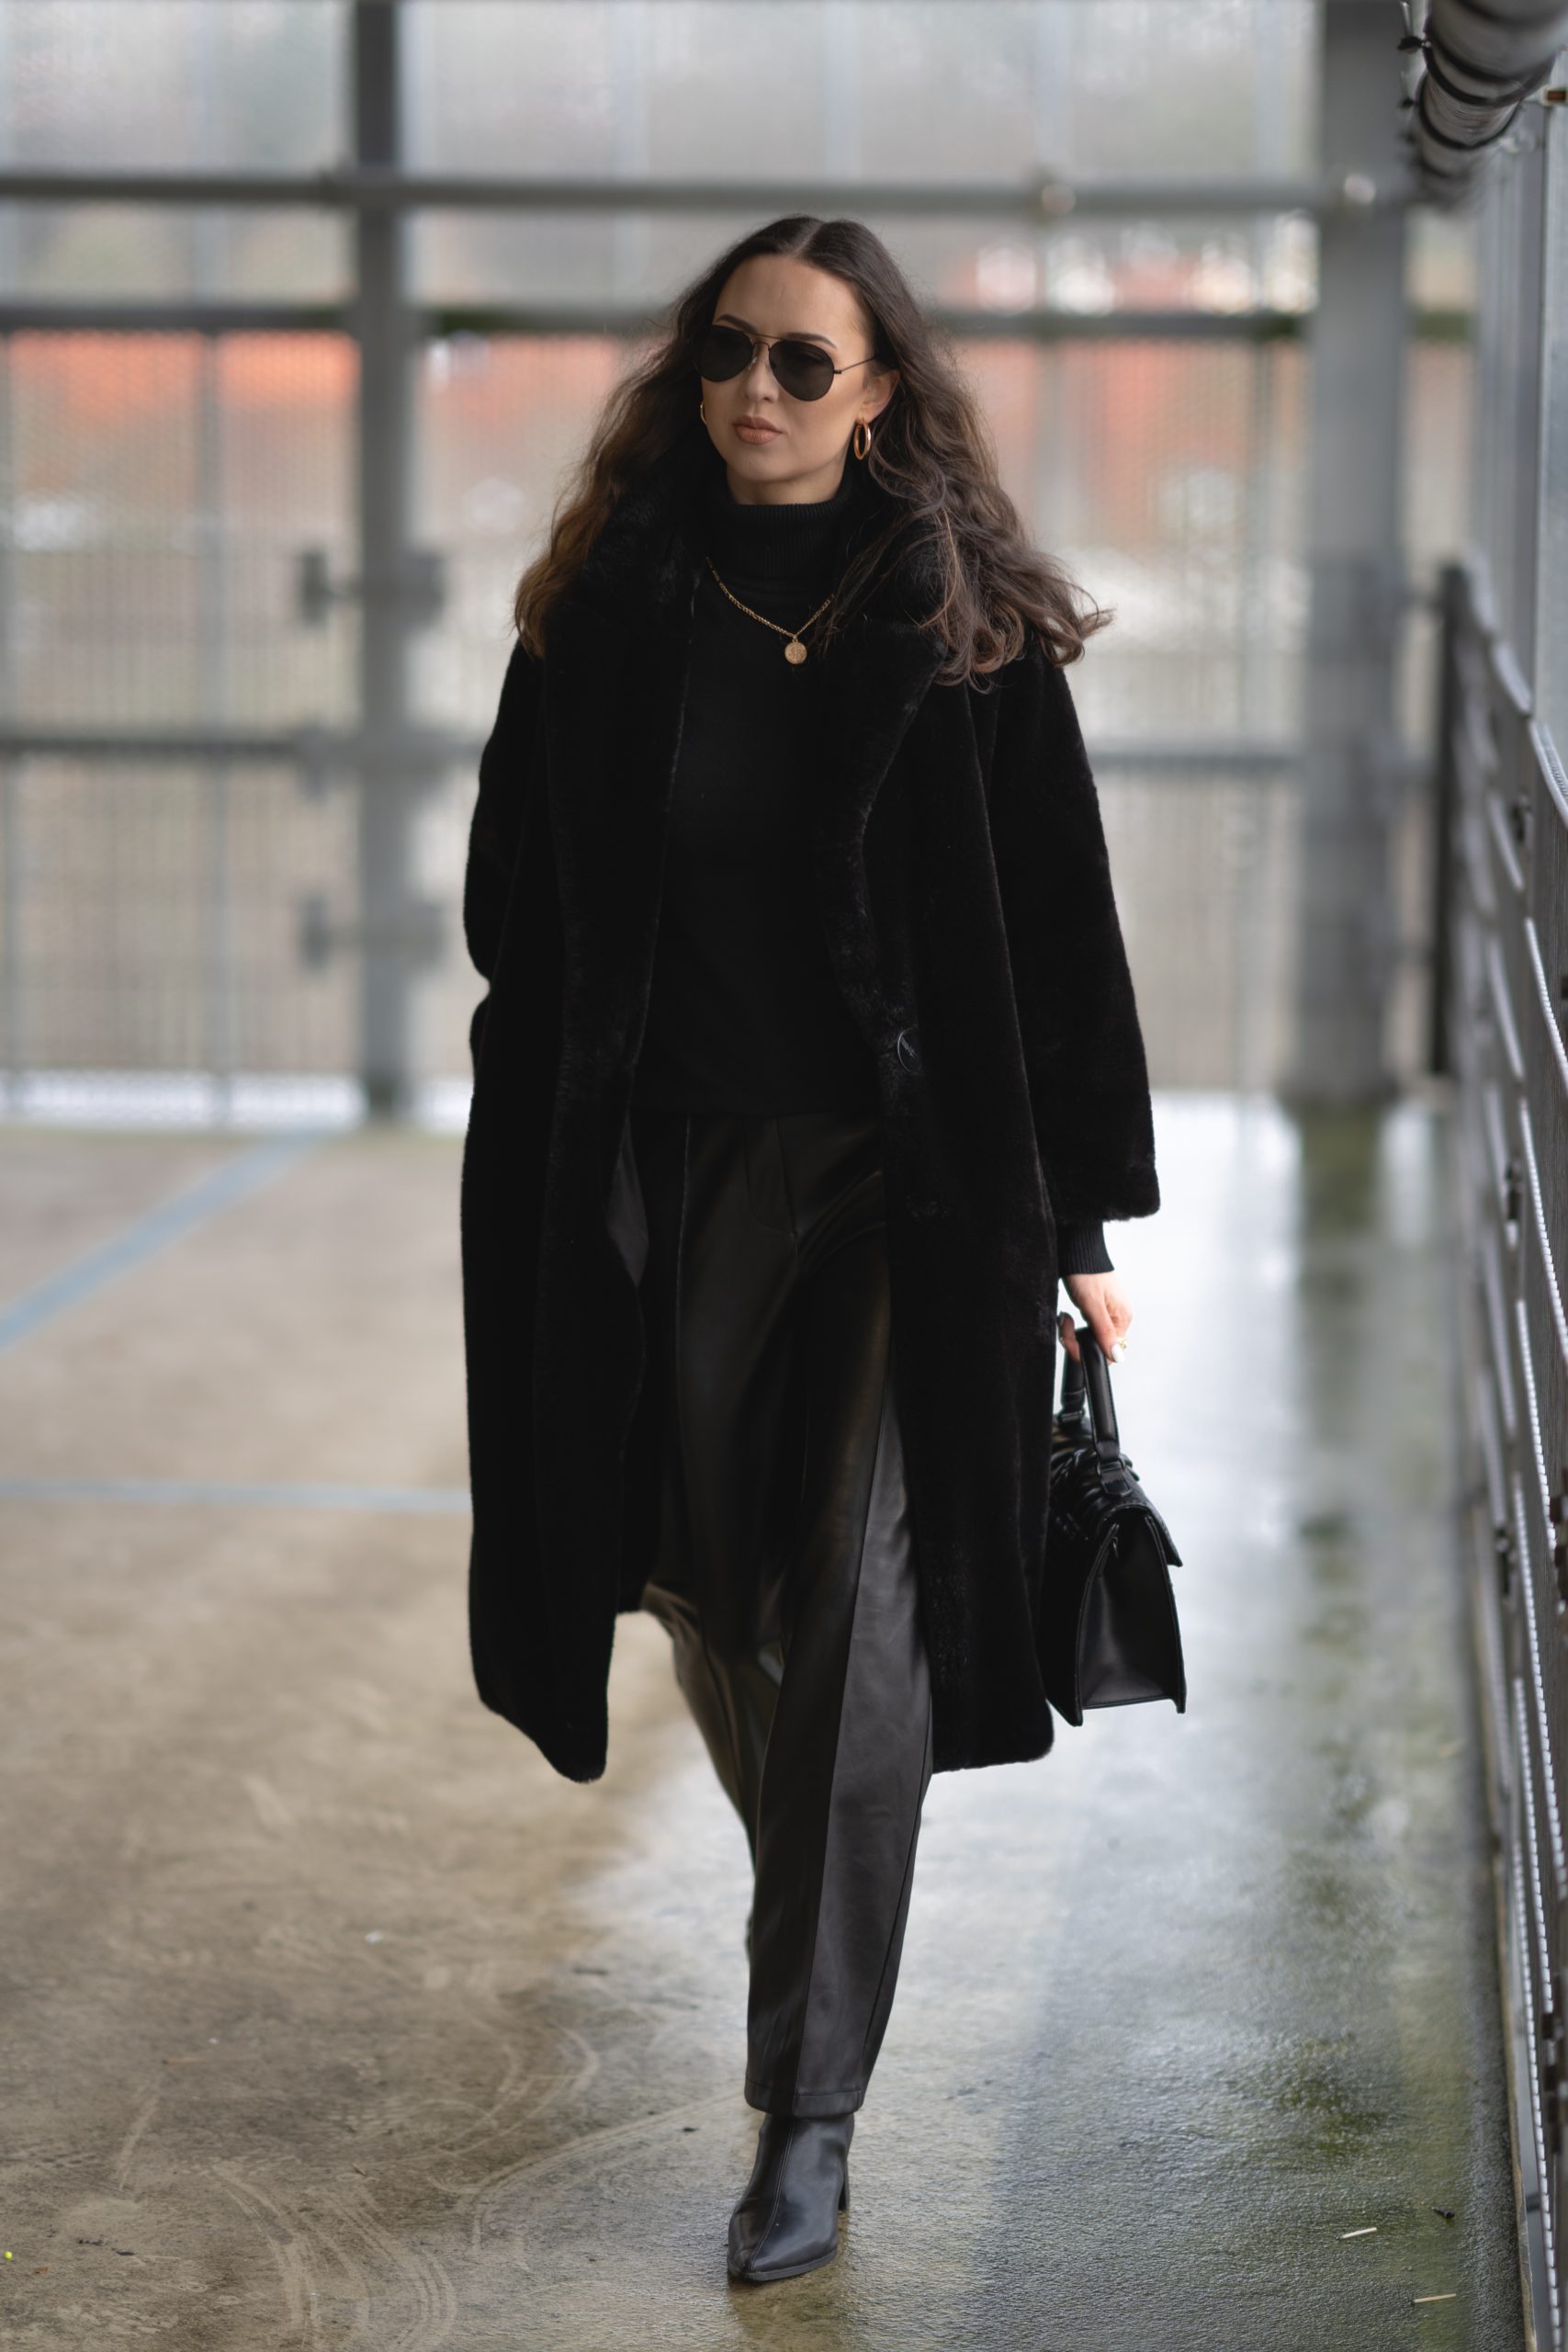 Black Faux Fur Coat and Leather Pants Outfit